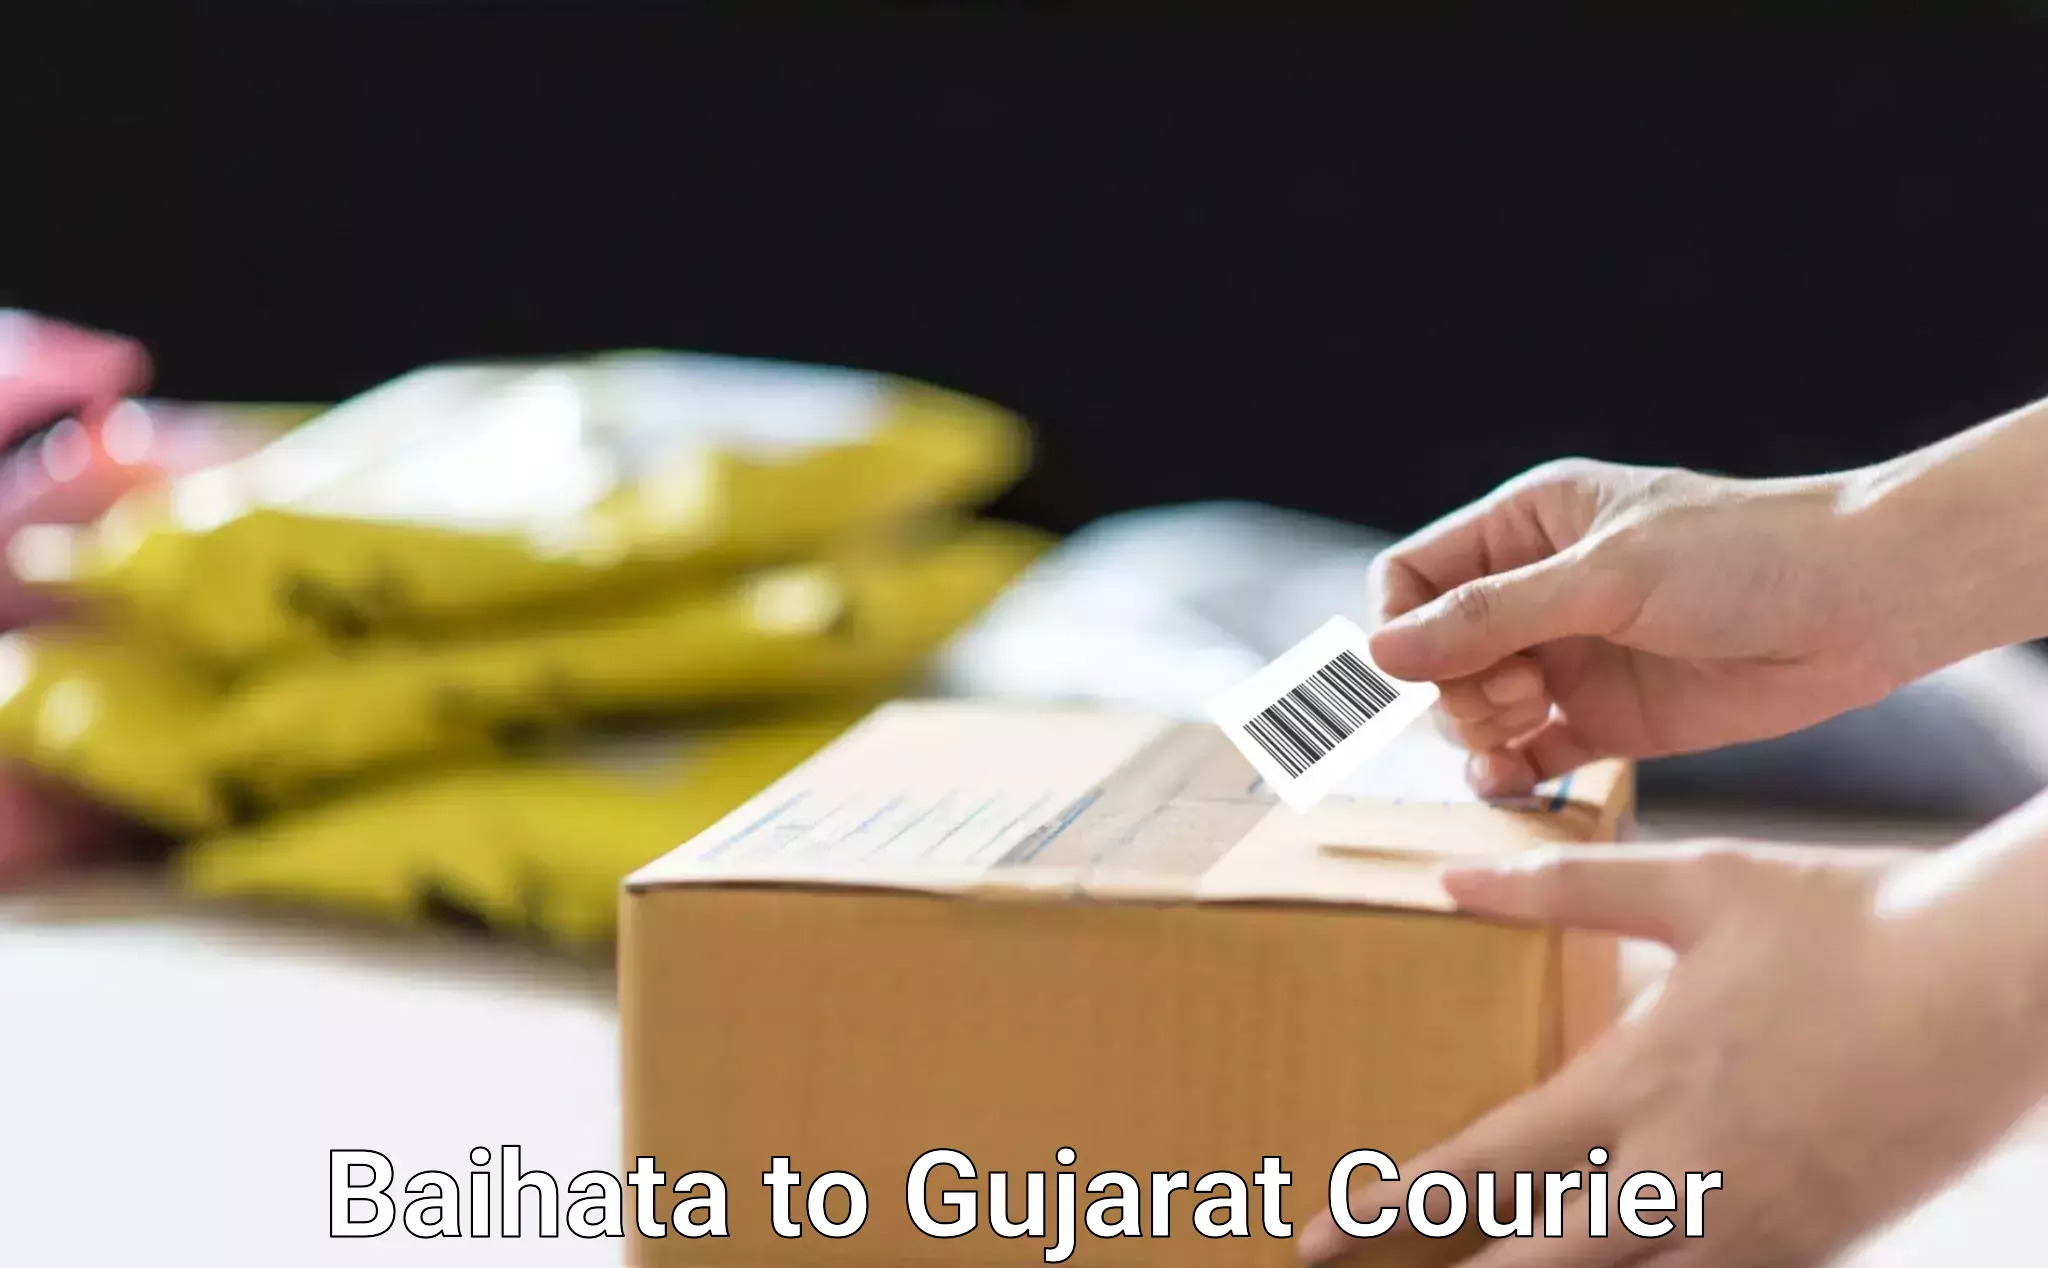 Global courier networks Baihata to Gujarat